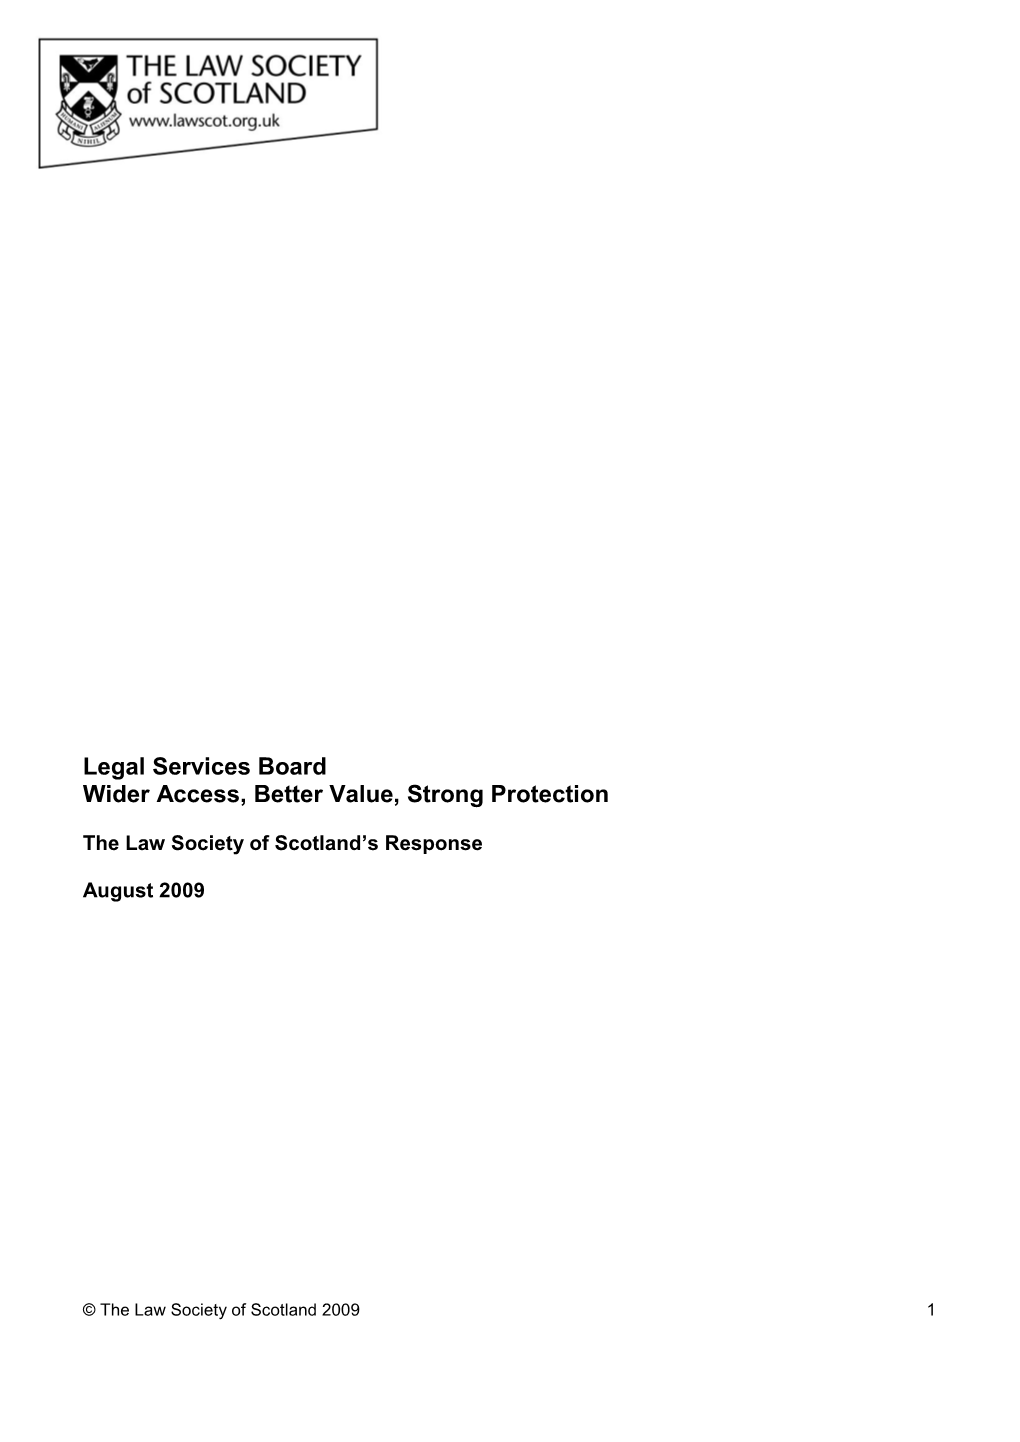 Law Society of Scotland: Response to LSB Consultation on Regulatory Regime for Alternative Business Structures